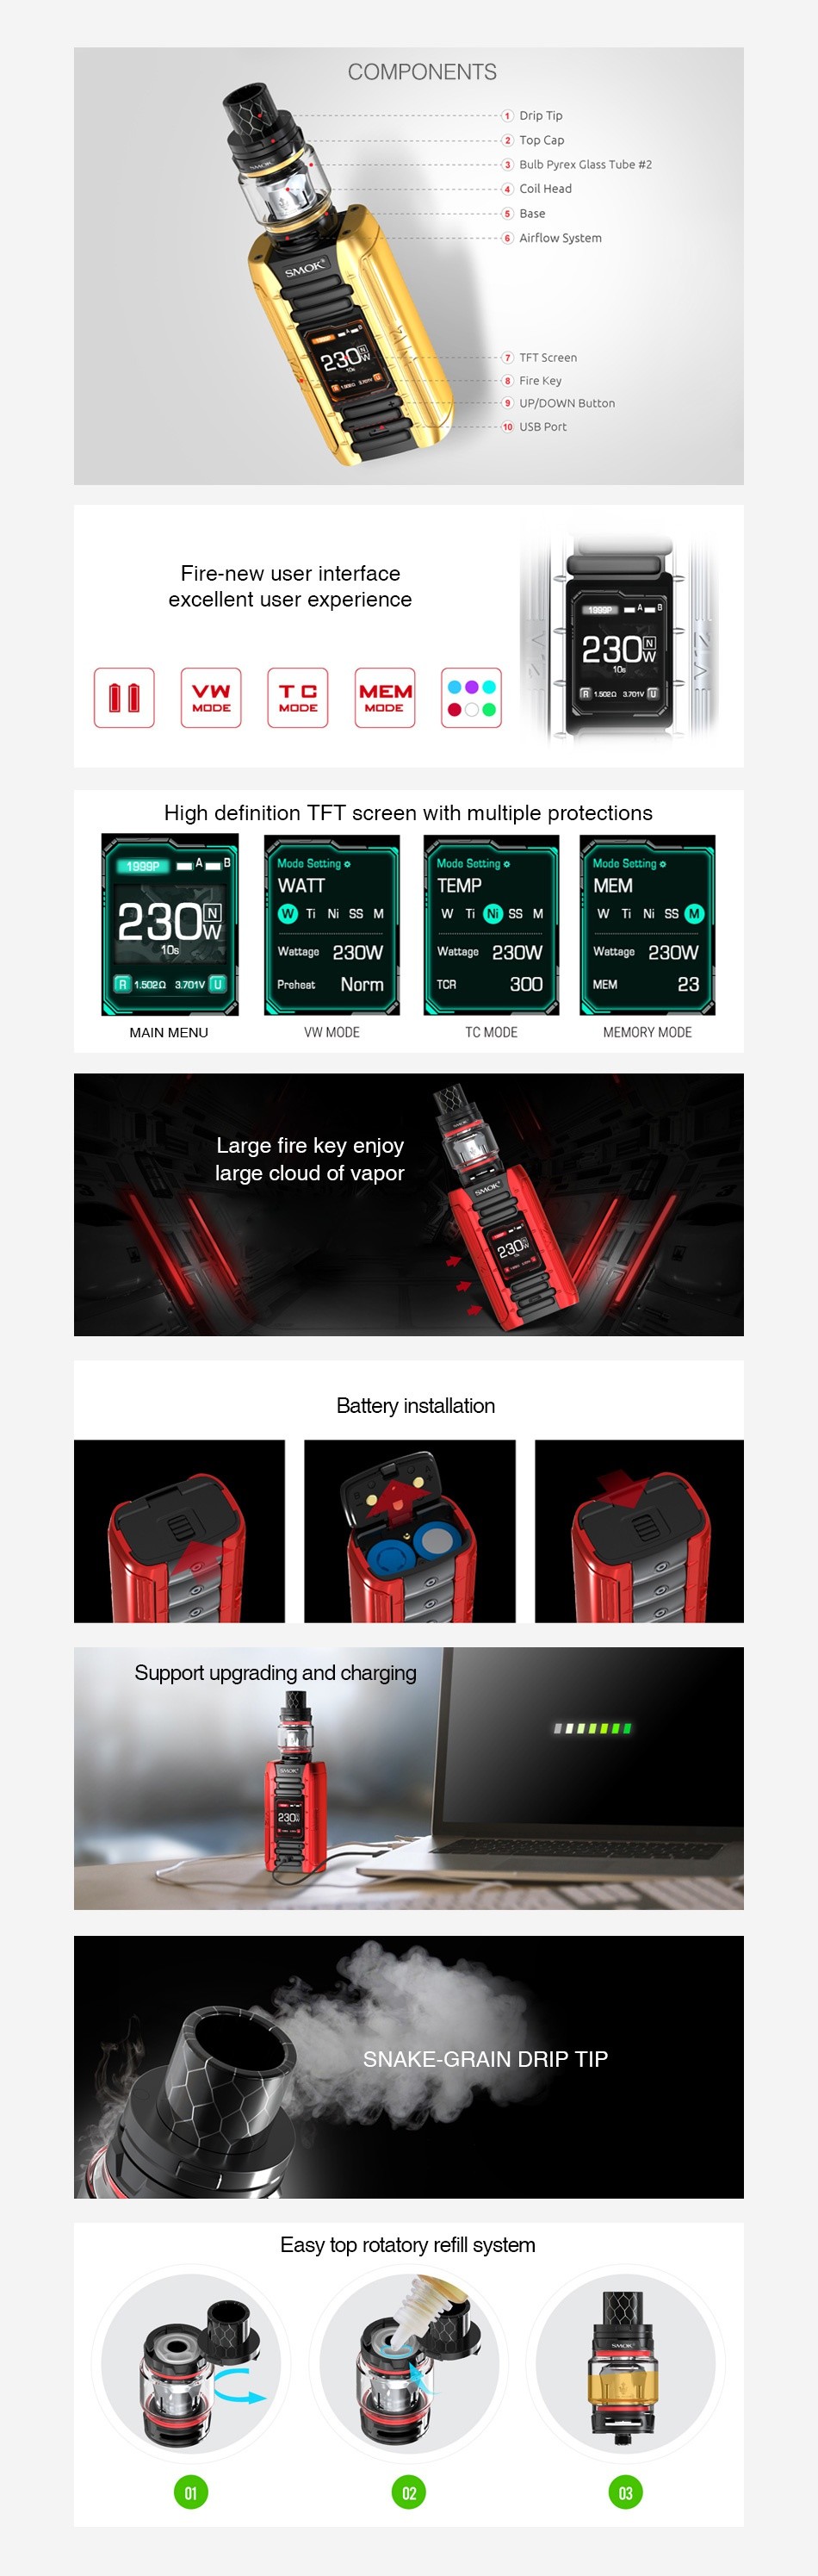 SMOK E-Priv 230W TC Kit with TFV12 Prince Tank COMPONENTS F excellent user experience 230  MEN     High definition TFT screen with multiple protections WATT TEMP MEM 230N W Ti Ni SS M 0 Weteye 230W Wattage 230w R 152L 3 U1v Prchcat 23 MAIN MENU VW MODE TC MODE MEMORY MODE Large fire key enjoy Battery installation Support upgrading and charging SNAKE GRAIN DRIP TIP p rotatory refill system